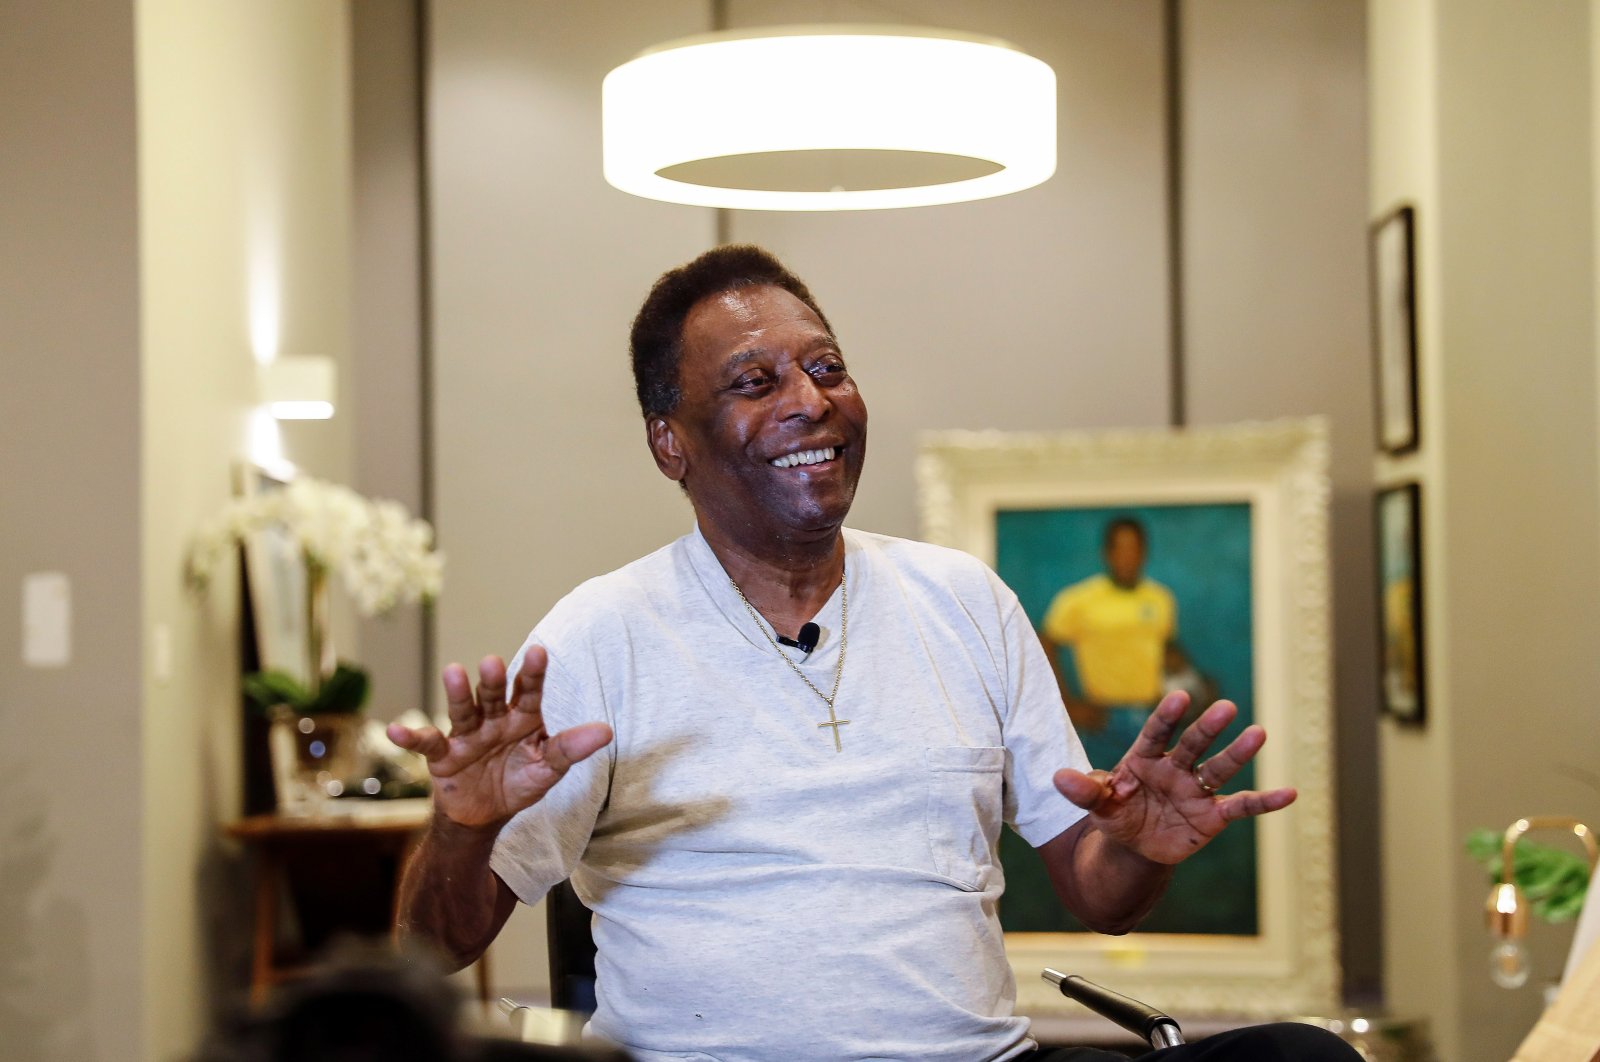 Brazilian football legend Pele speaks during an interview with Spanish news agency EFE at the Pele Museum in Santos, Brazil, Nov. 12, 2019. (EPA Photo)